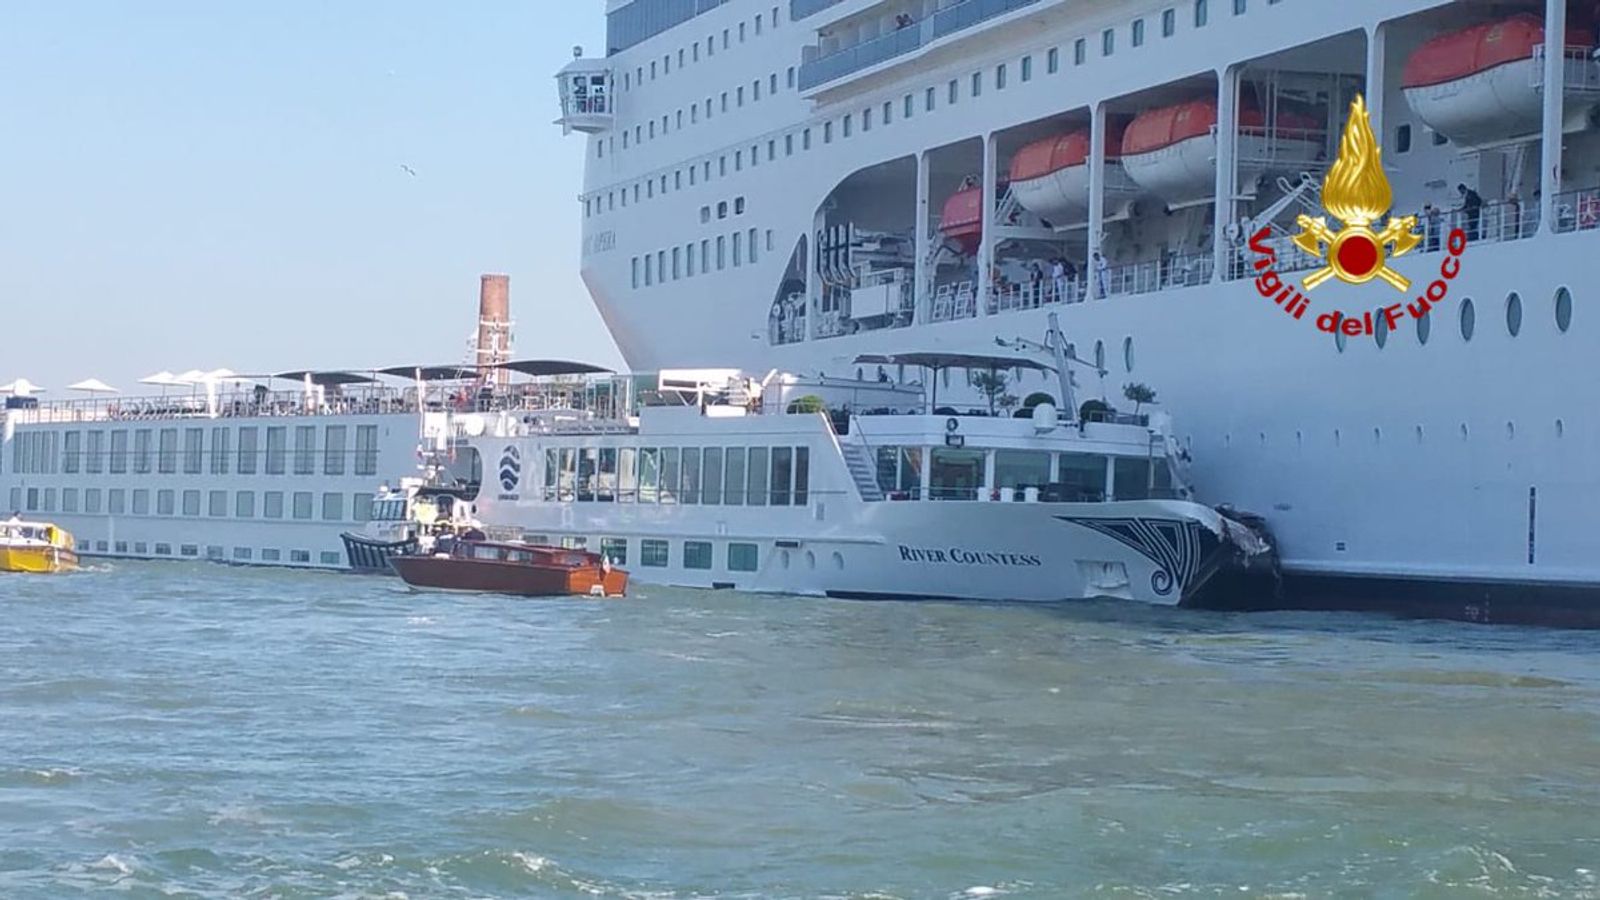 cruise ship hits dock in italy